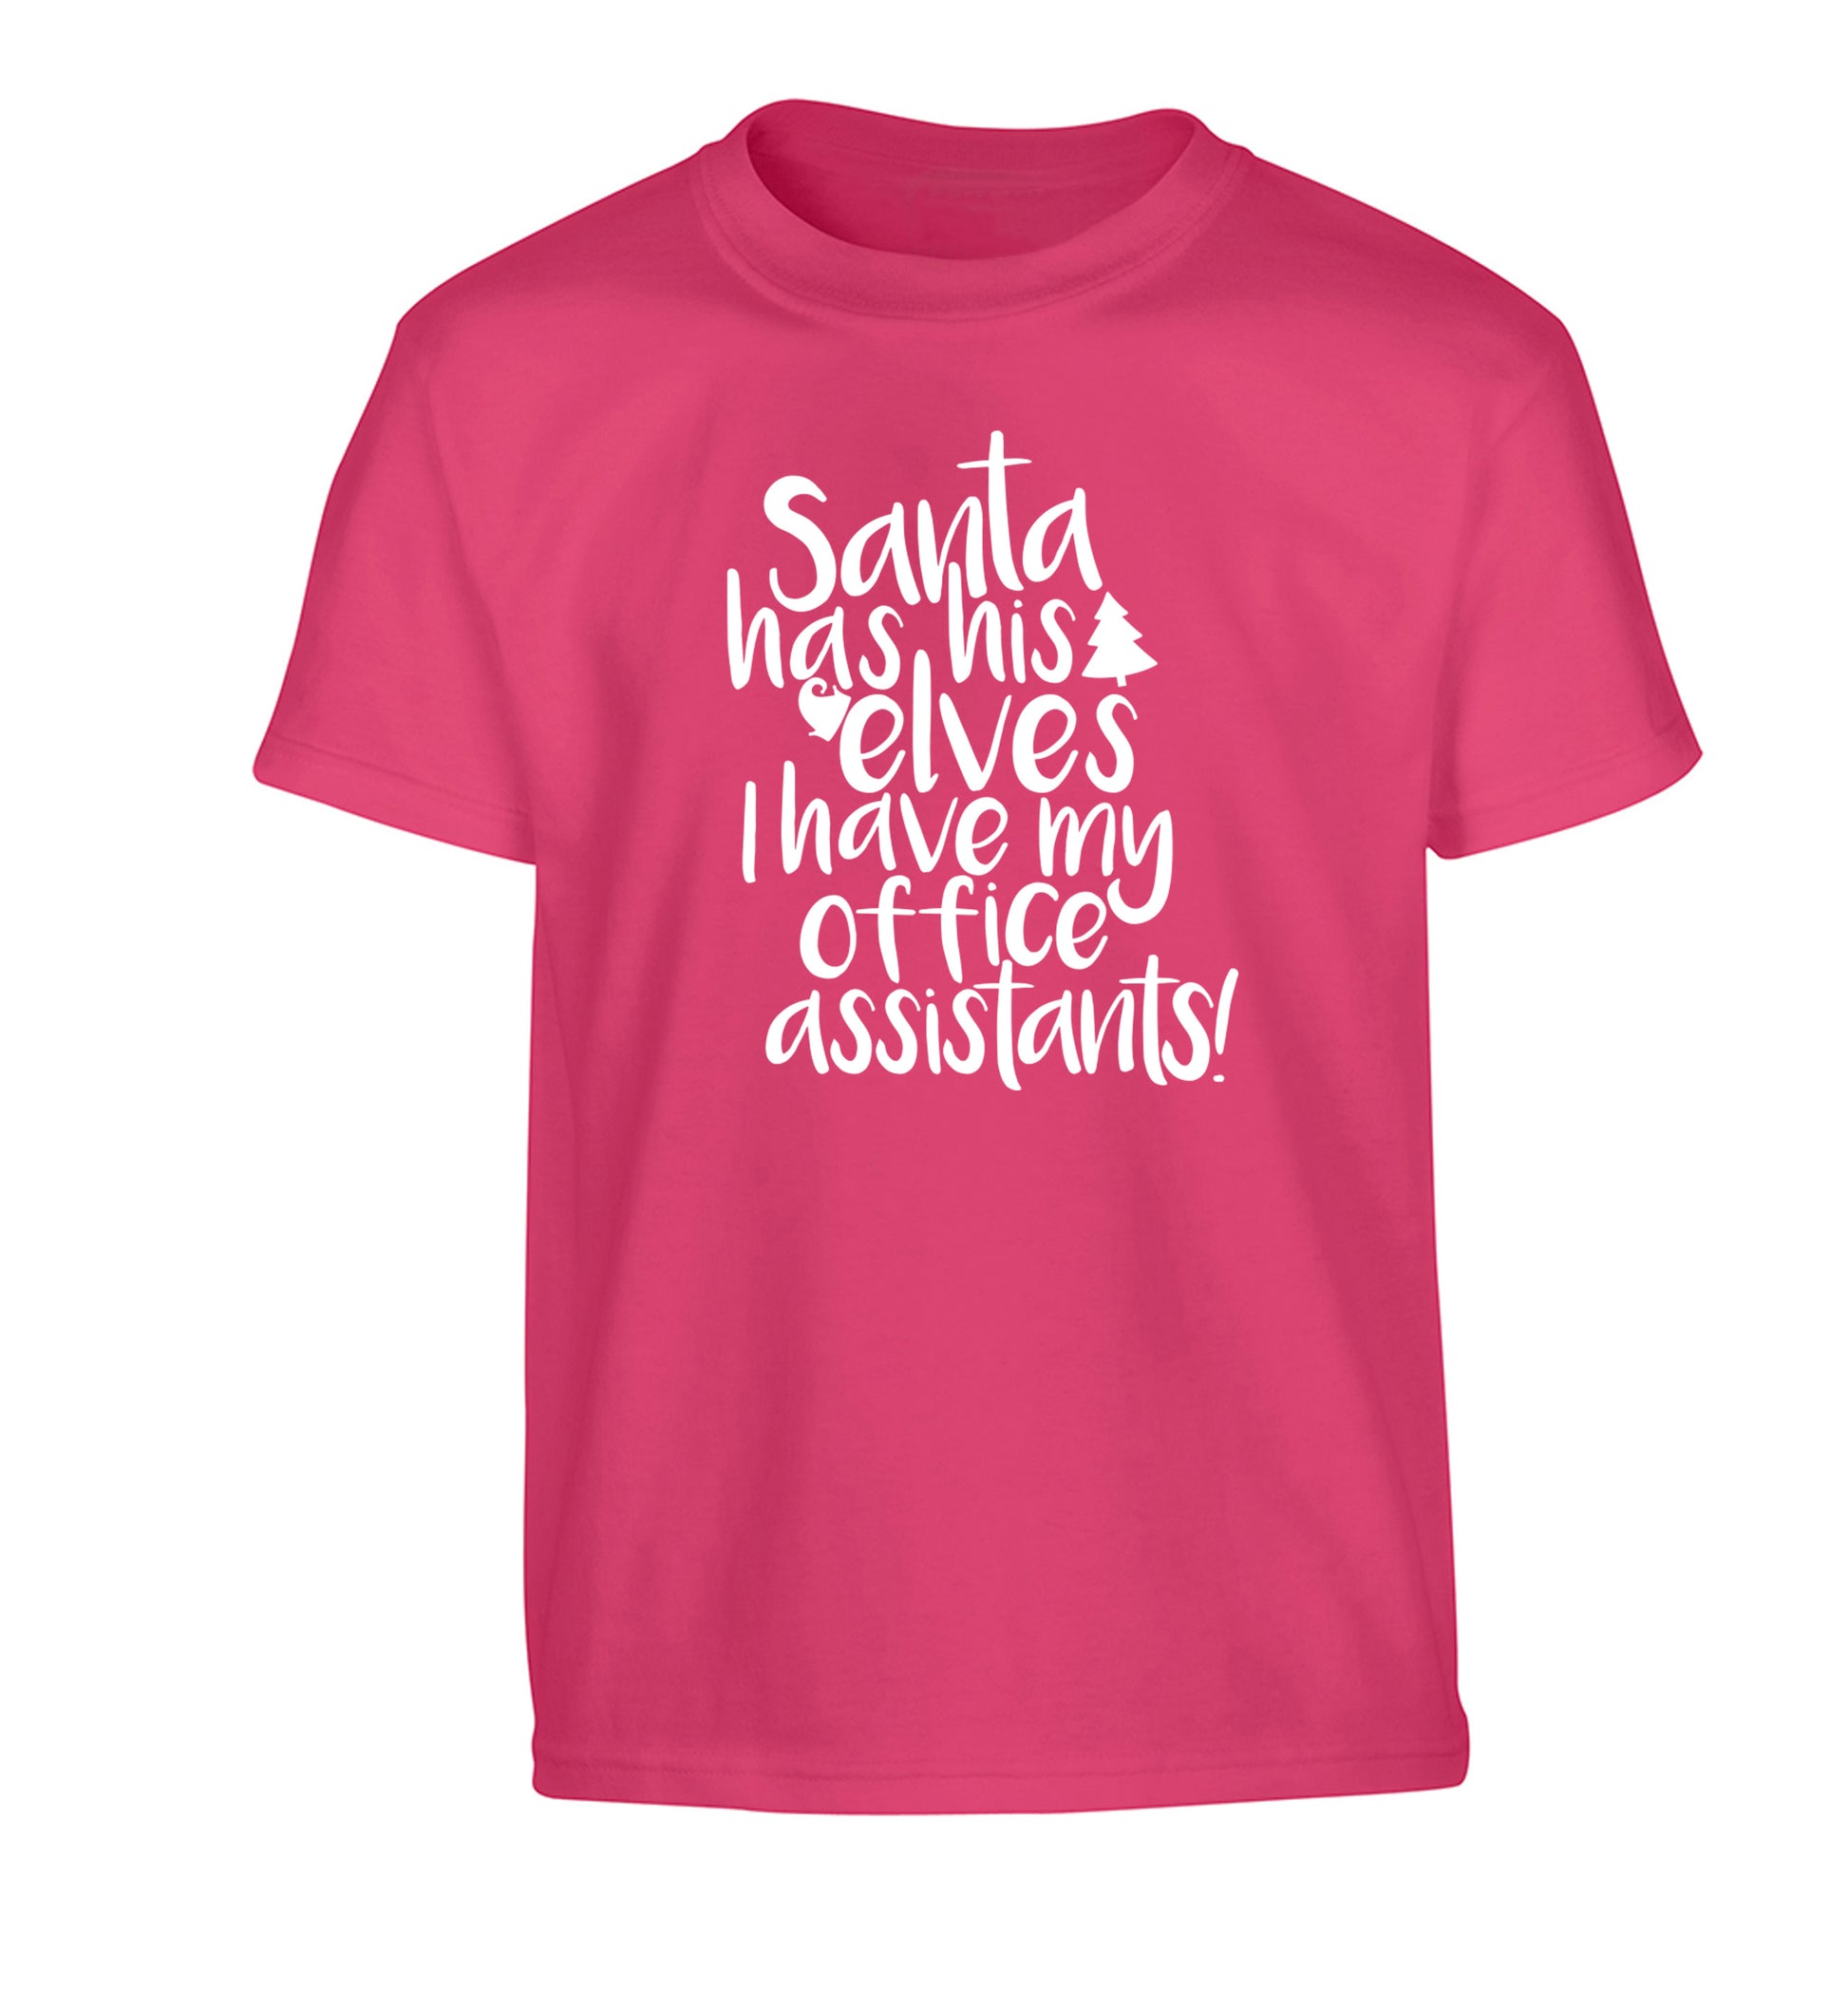 Santa has his elves I have my office assistants Children's pink Tshirt 12-14 Years